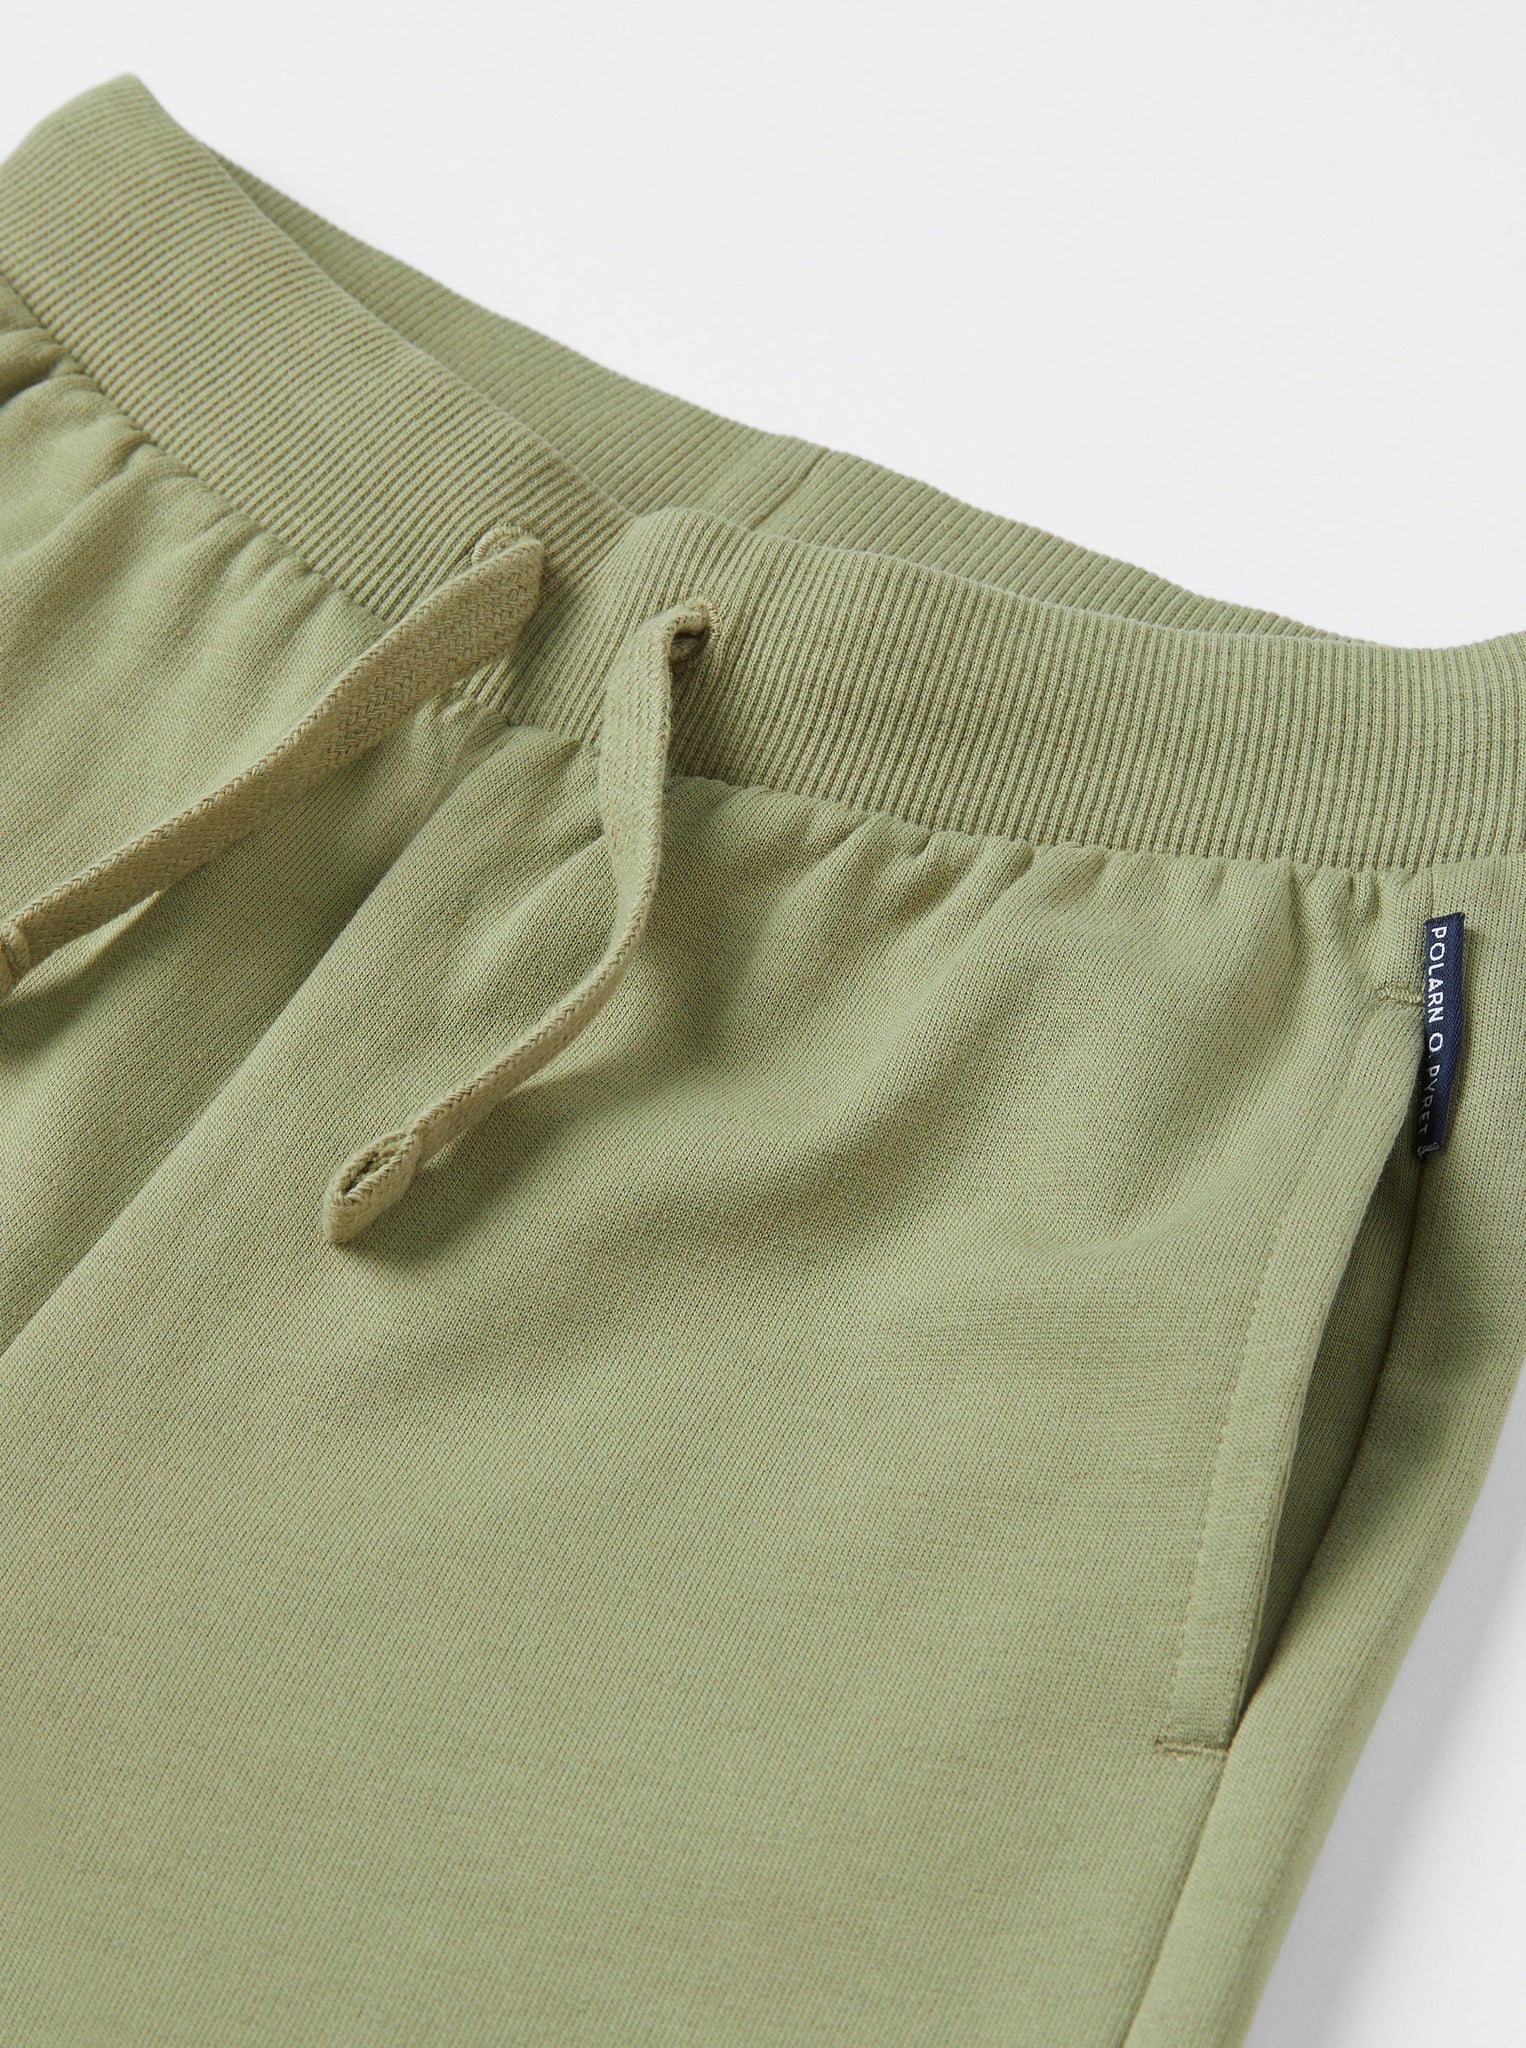 Organic Cotton Green Kids Joggers from the Polarn O. Pyret kidswear collection. Ethically produced kids clothing.